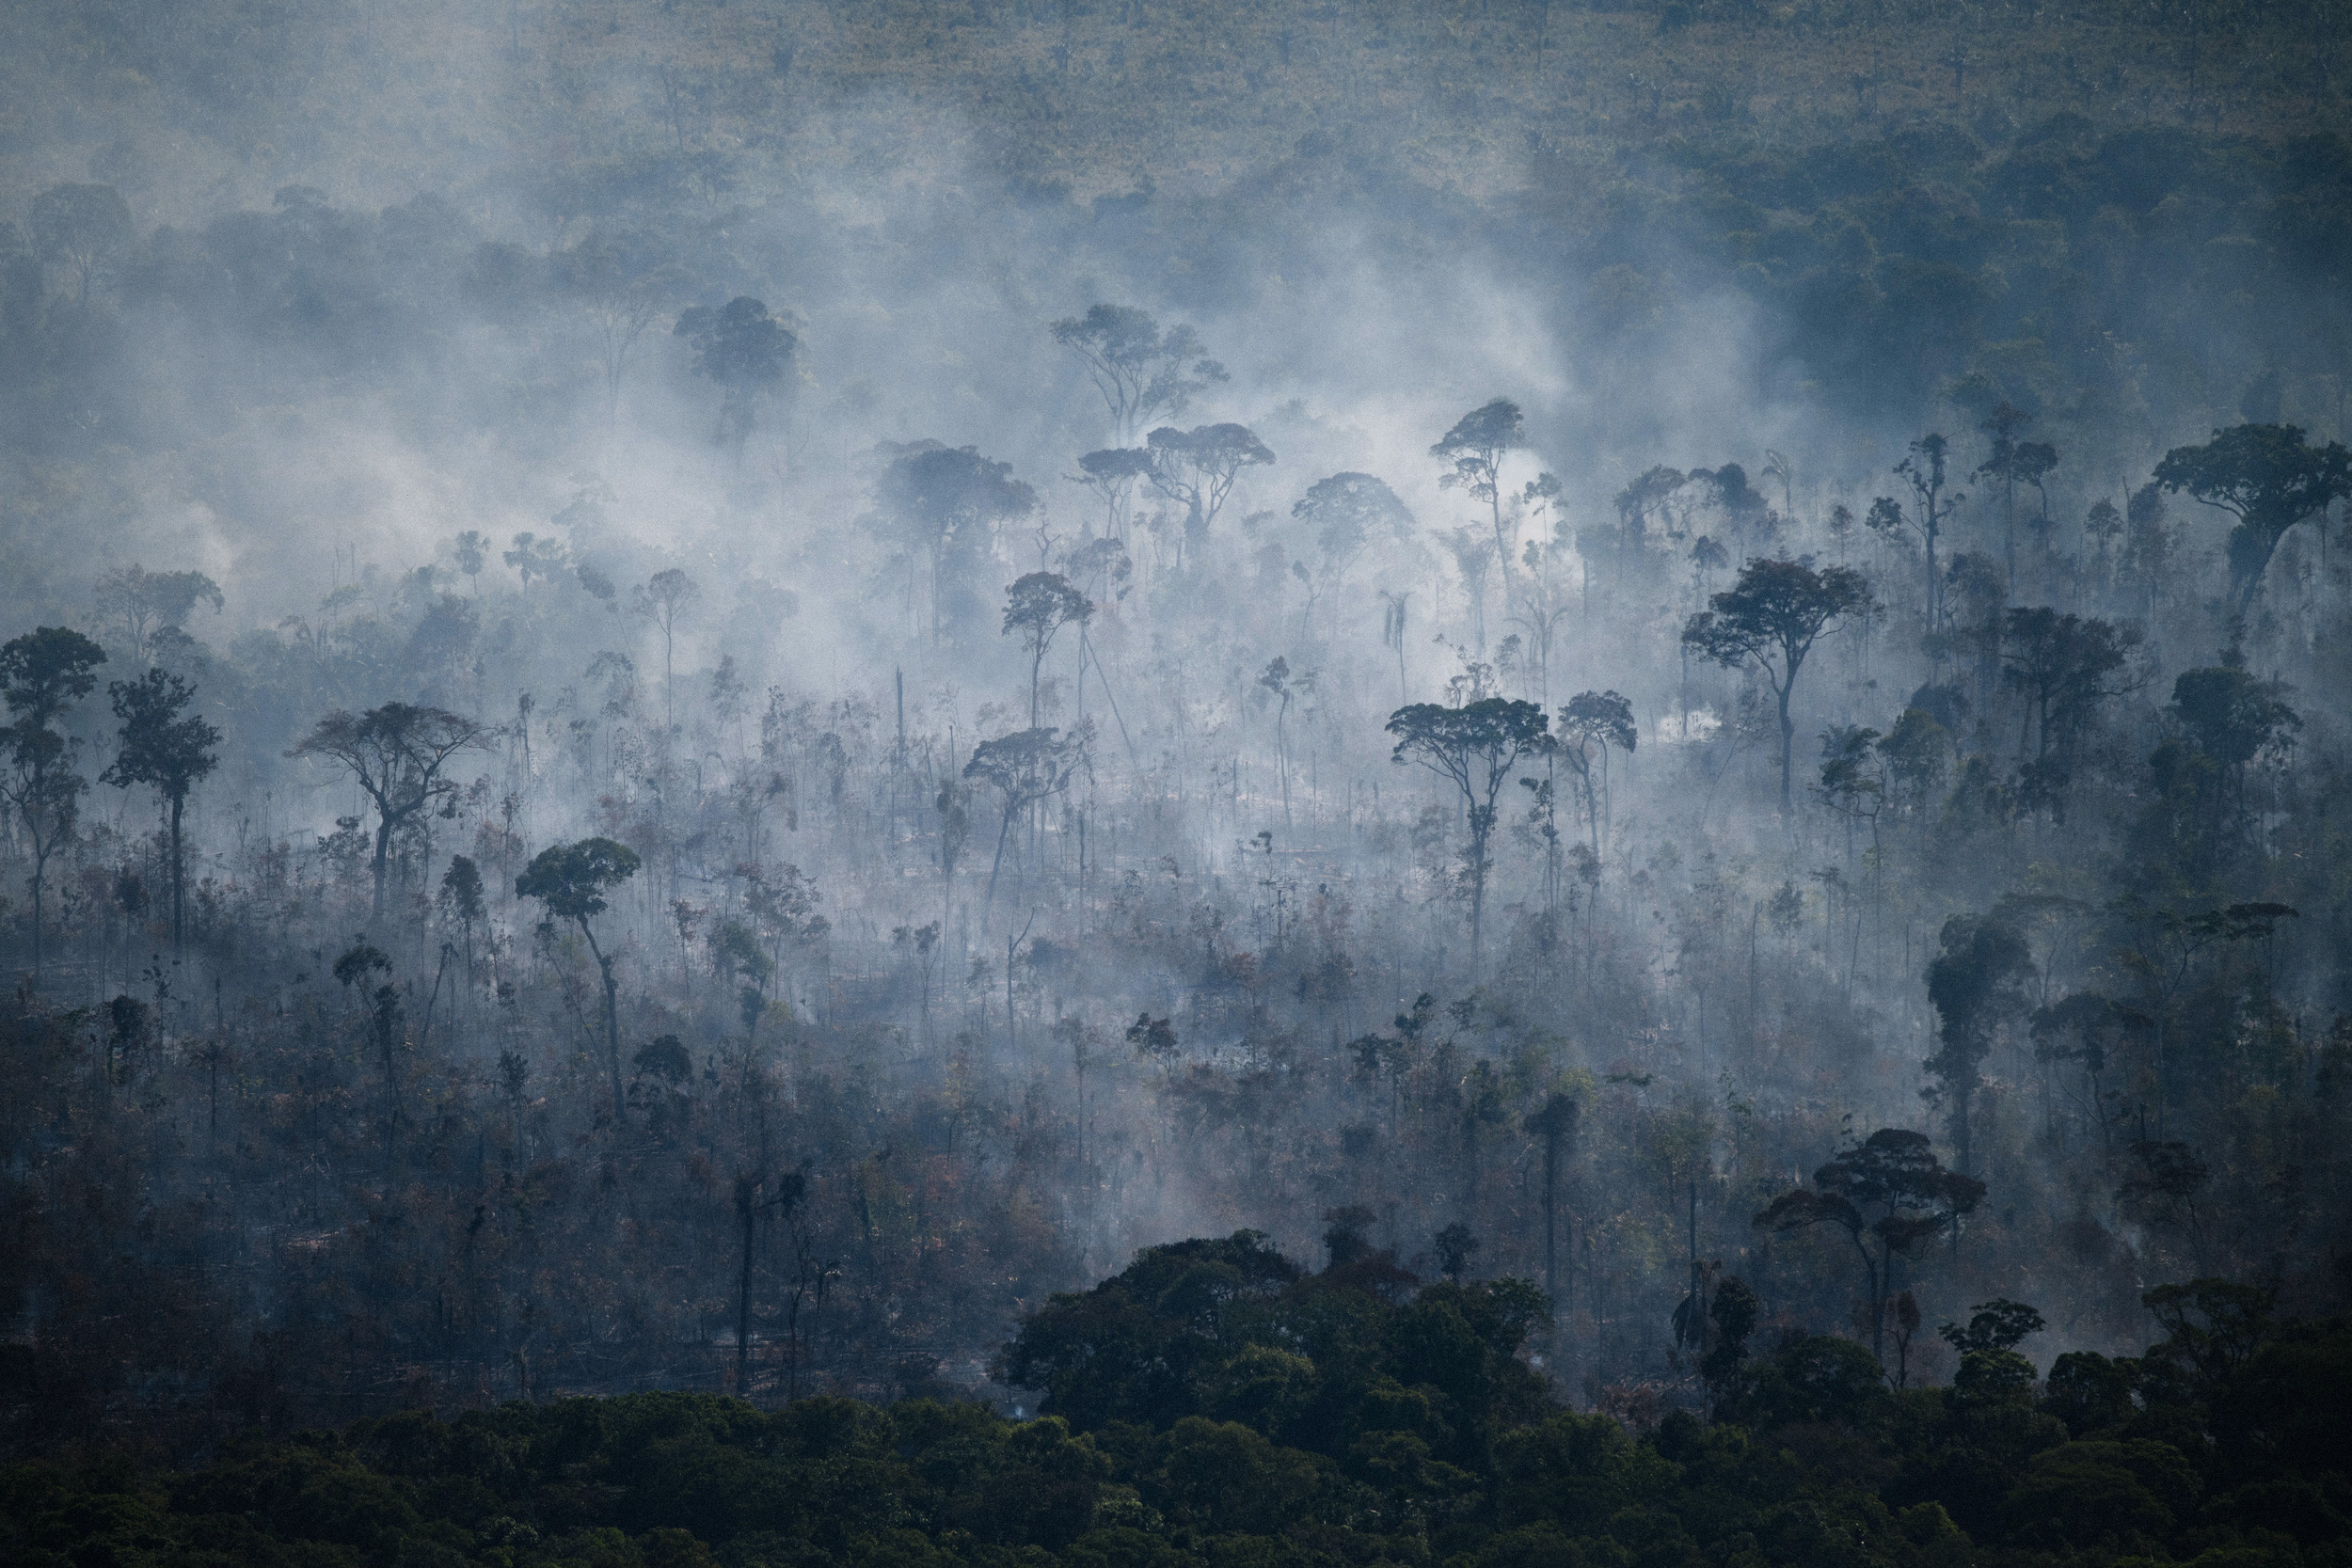 Apuí, Amazonas state. Greenpeace Brazil flew over the southern Amazonas and northern Rondônia states in Brazil to monitor deforestation and forest fires in the Amazon in July 2022. © Christian Braga / Greenpeace